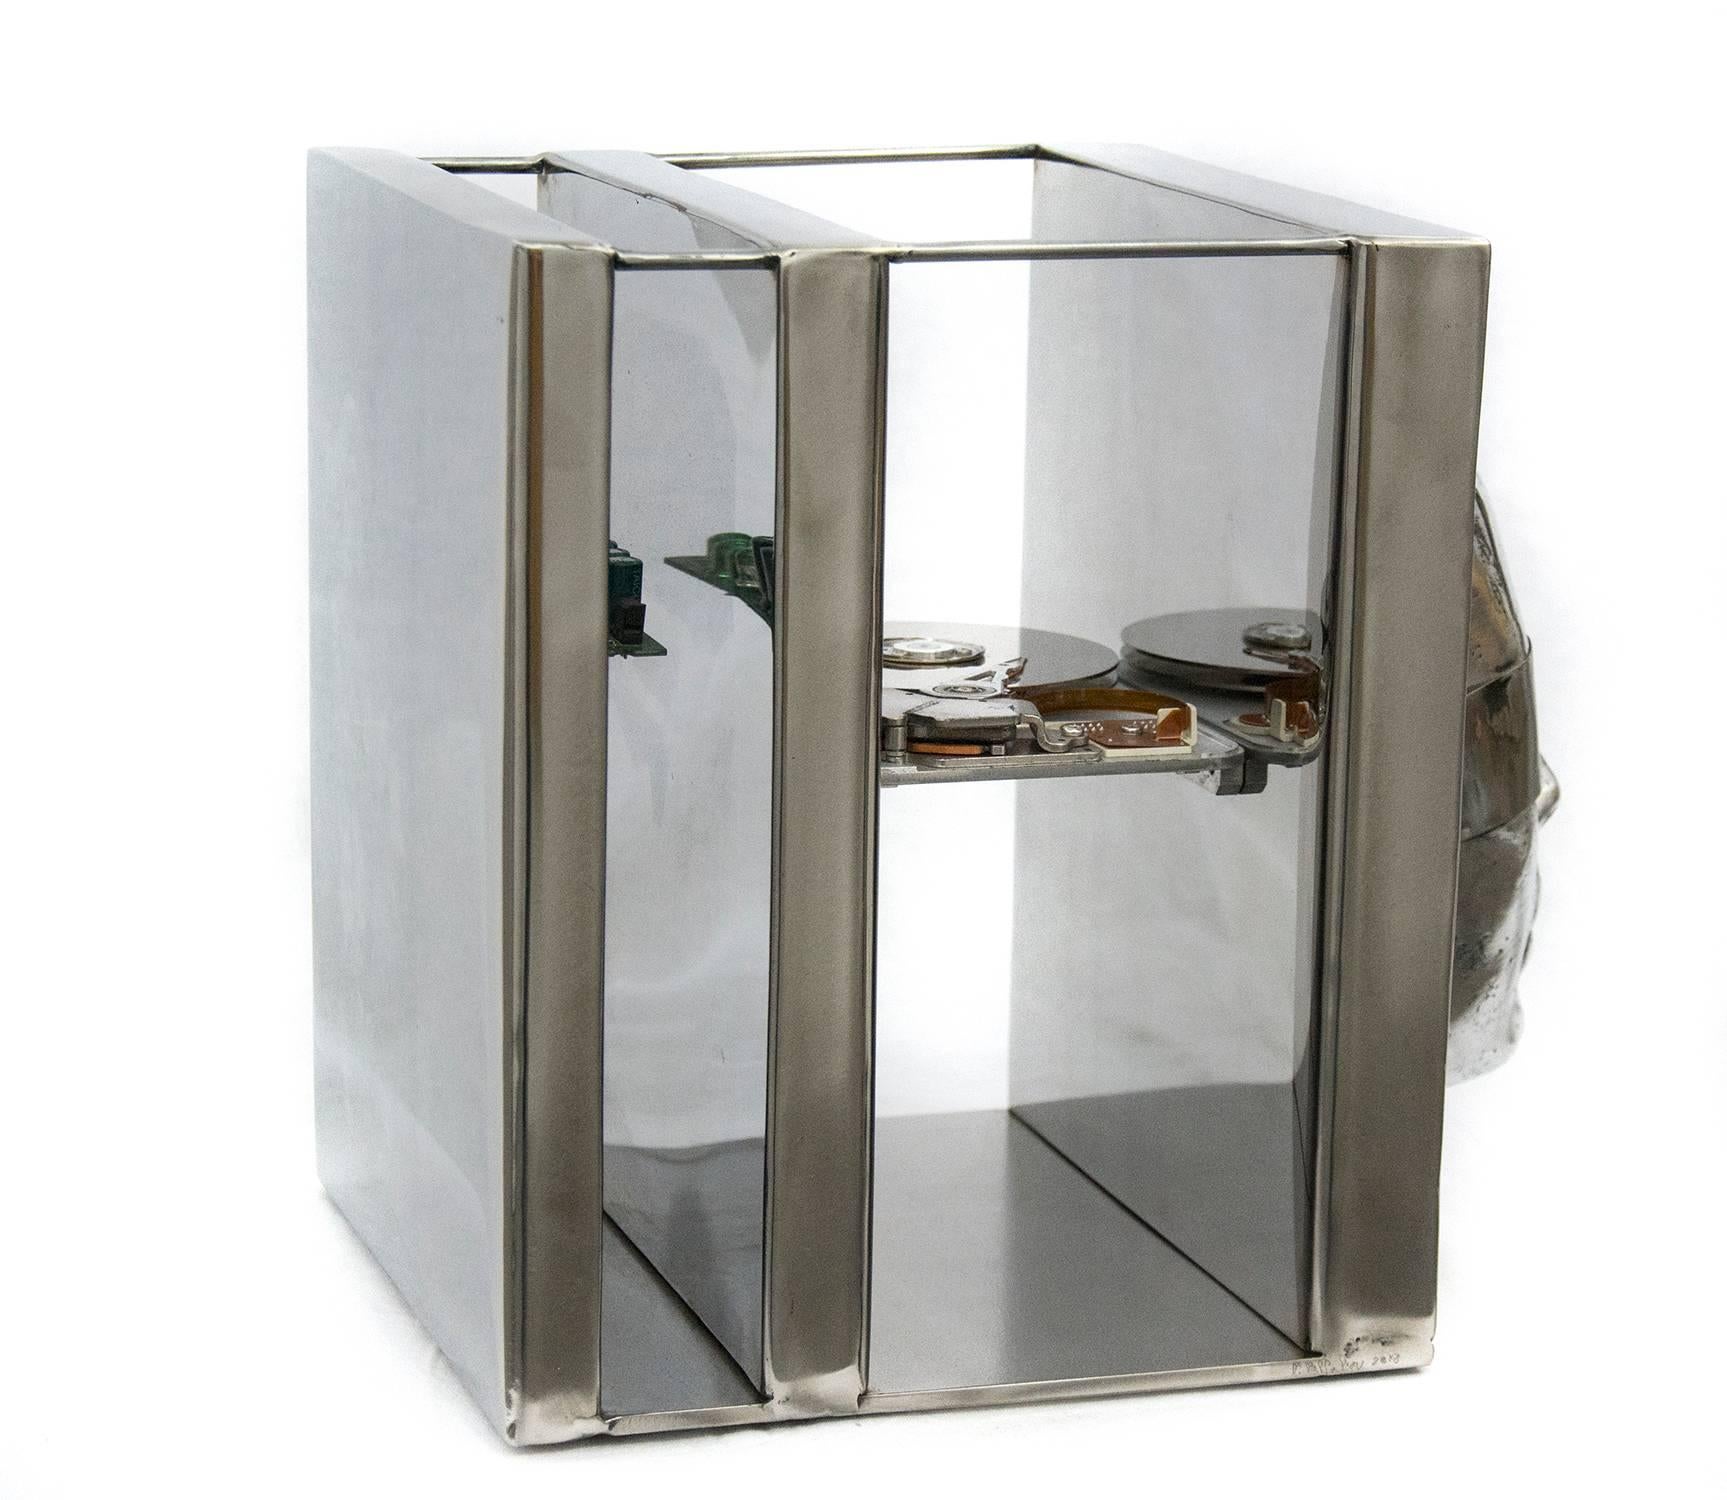 In this provocative steam punk inspired sculpture, Quebec artist Philippe Pallfray has replaced the brain of a cast human head with a computer hard drive. The drive is encased in a polished and highly reflective stainless steel box. Thematically,